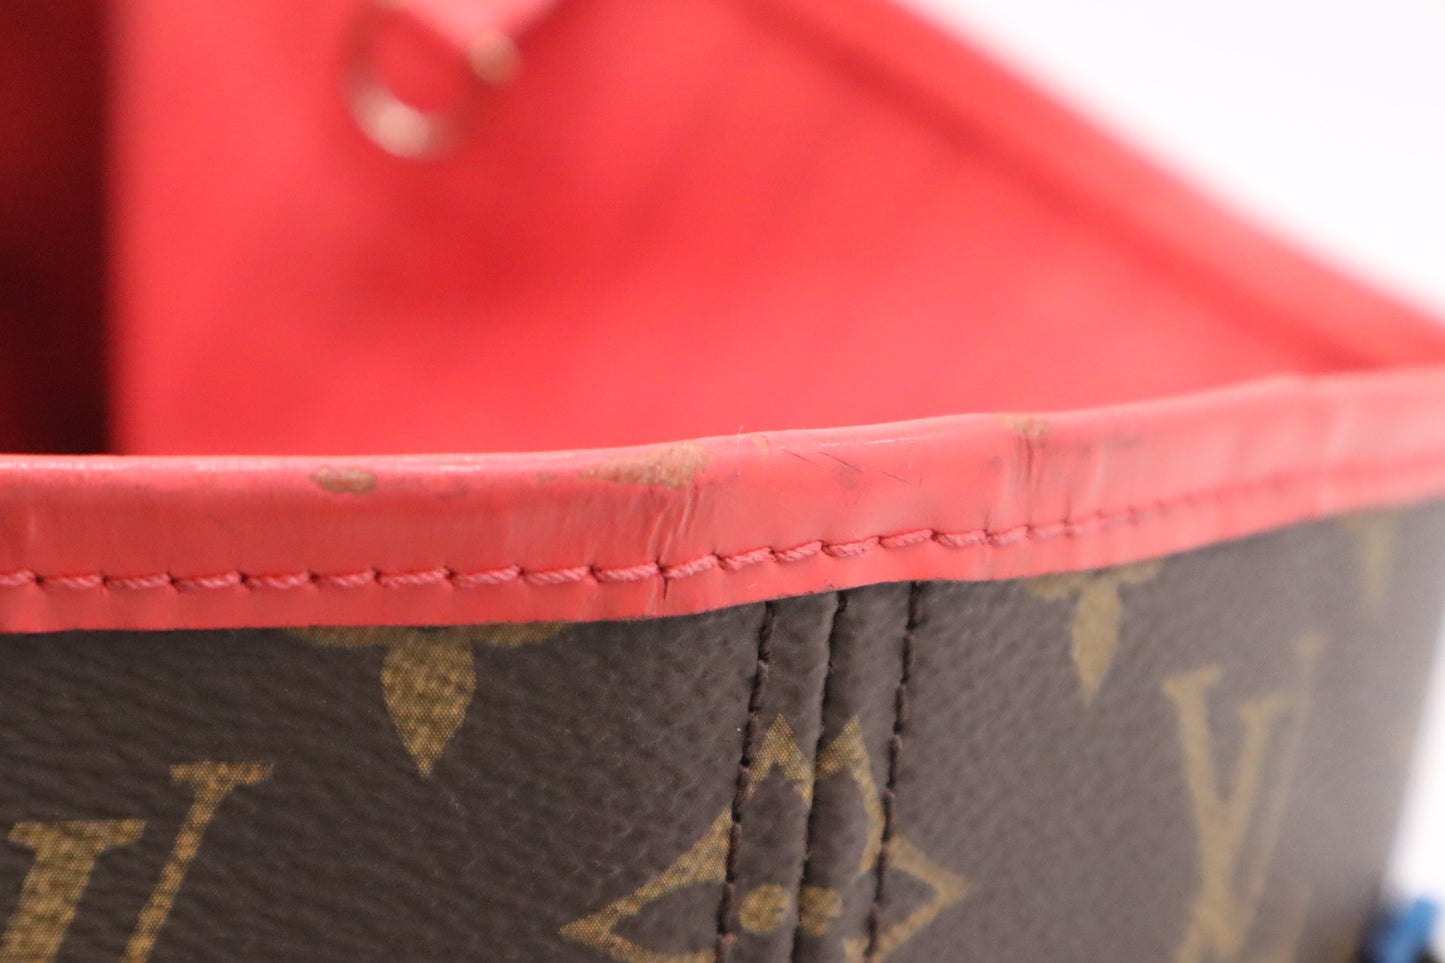 Louis Vuitton Neverfull Totem MM in Monogram Canvas